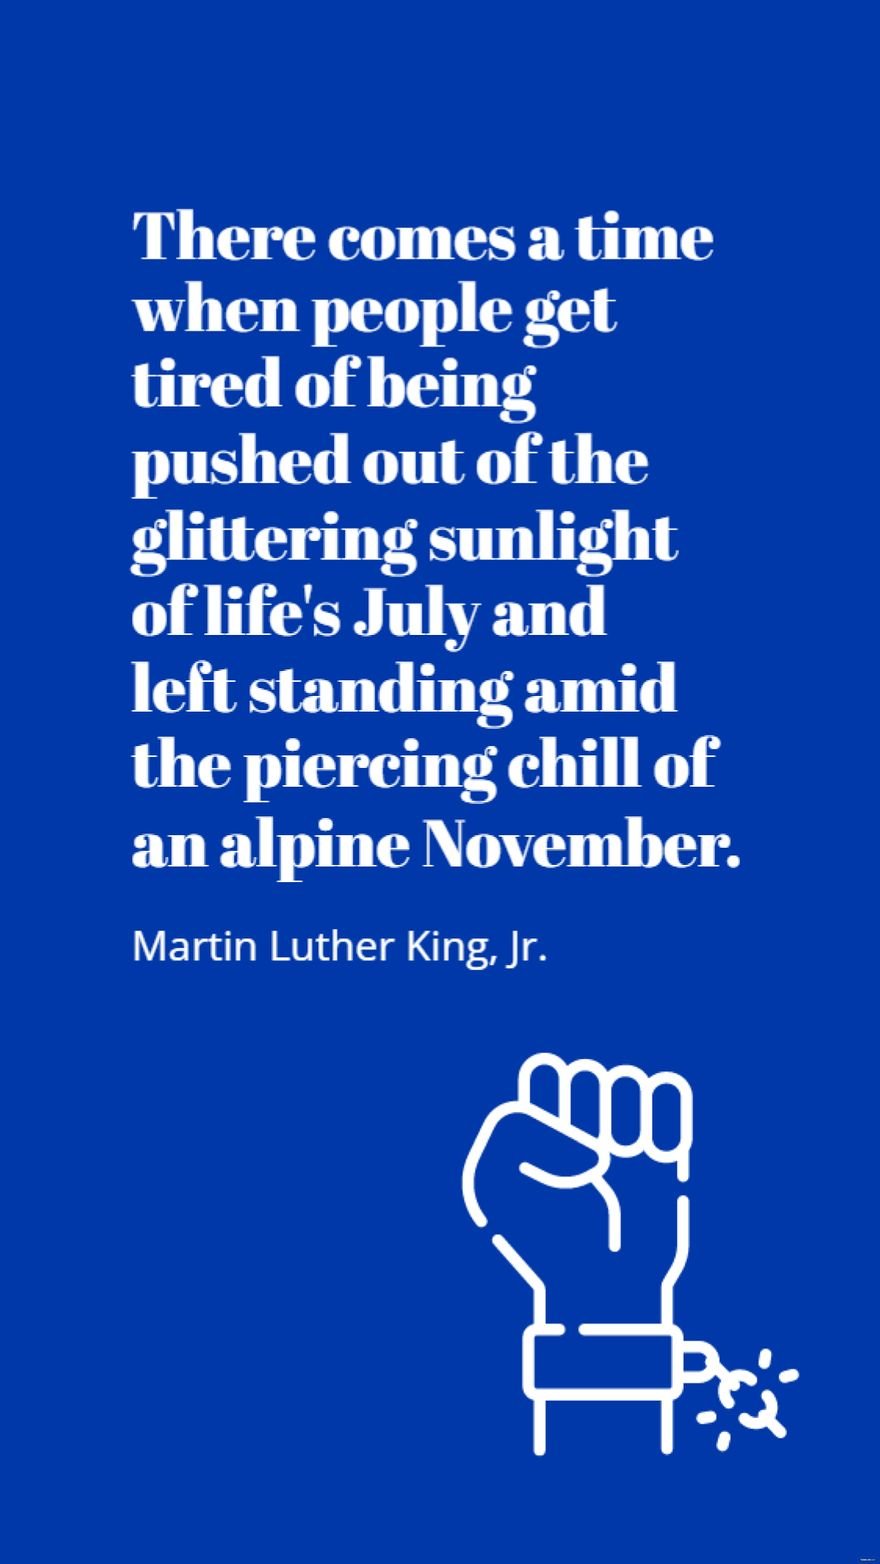 Martin Luther King, Jr. - There comes a time when people get tired of being pushed out of the glittering sunlight of life's July and left standing amid the piercing chill of an alpine November.